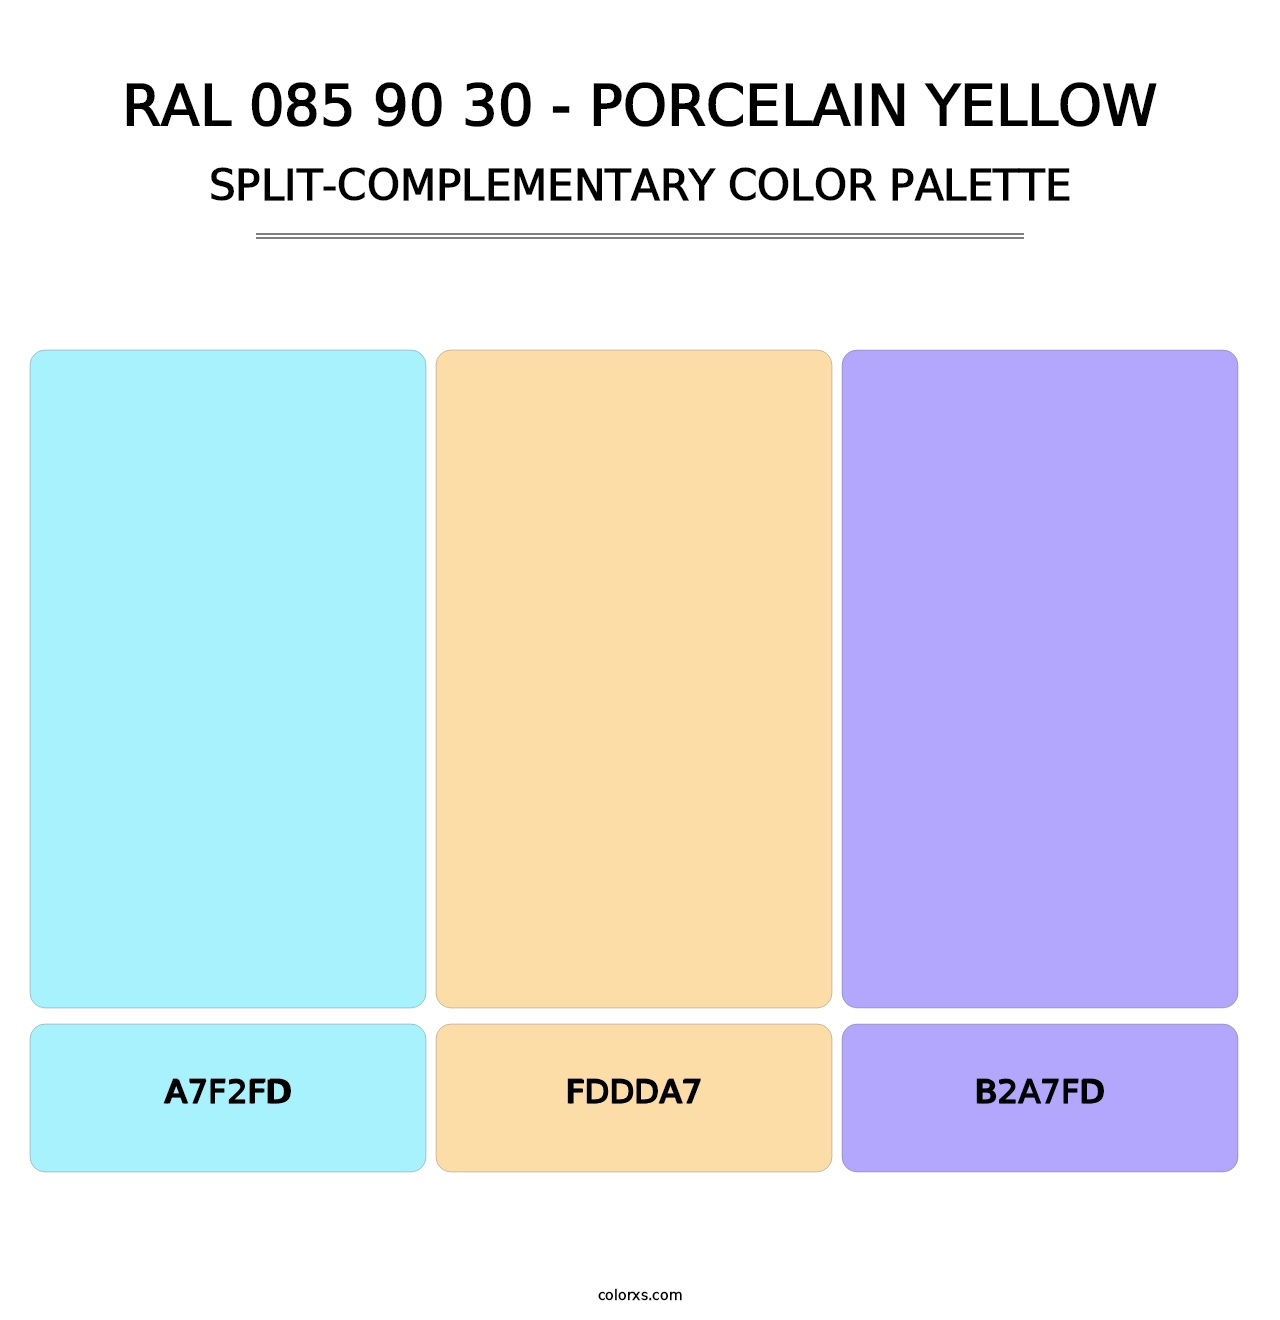 RAL 085 90 30 - Porcelain Yellow - Split-Complementary Color Palette